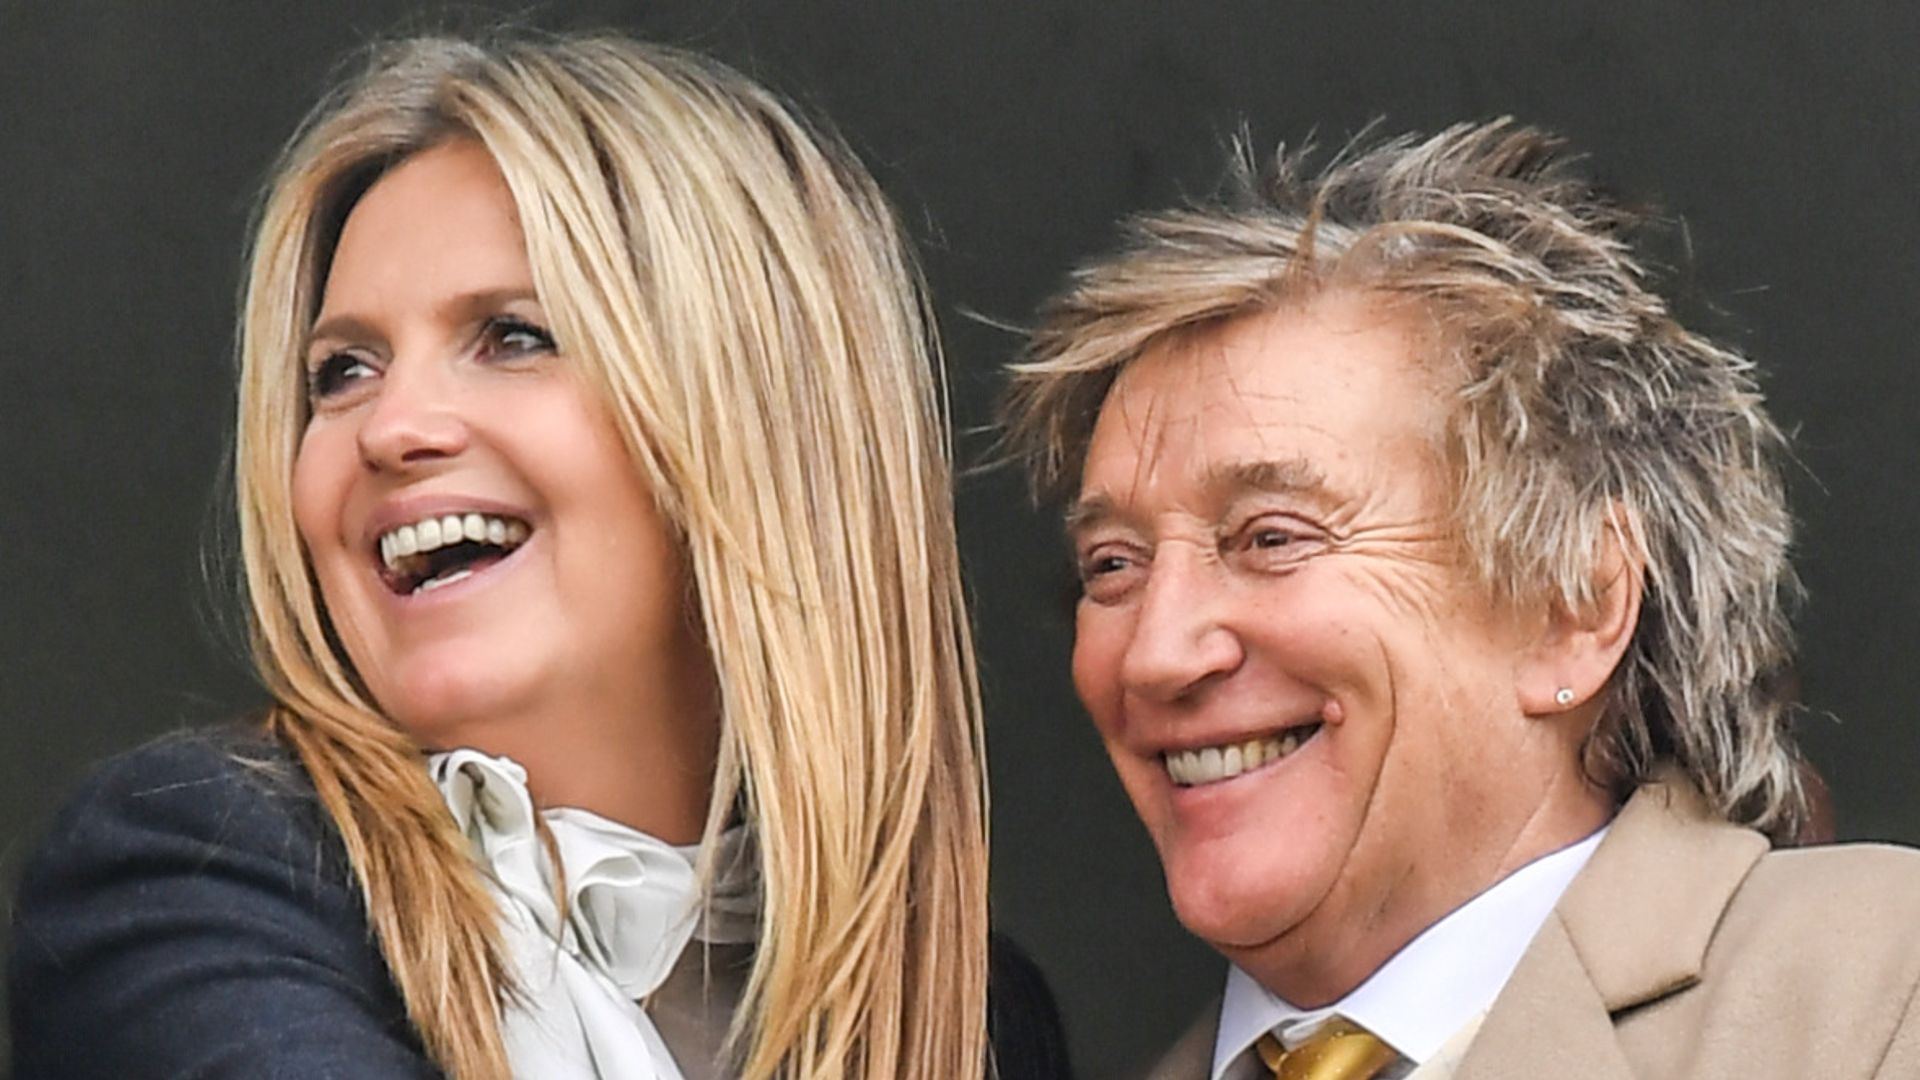 Rod Stewart and Penny Lancaster smiling at races